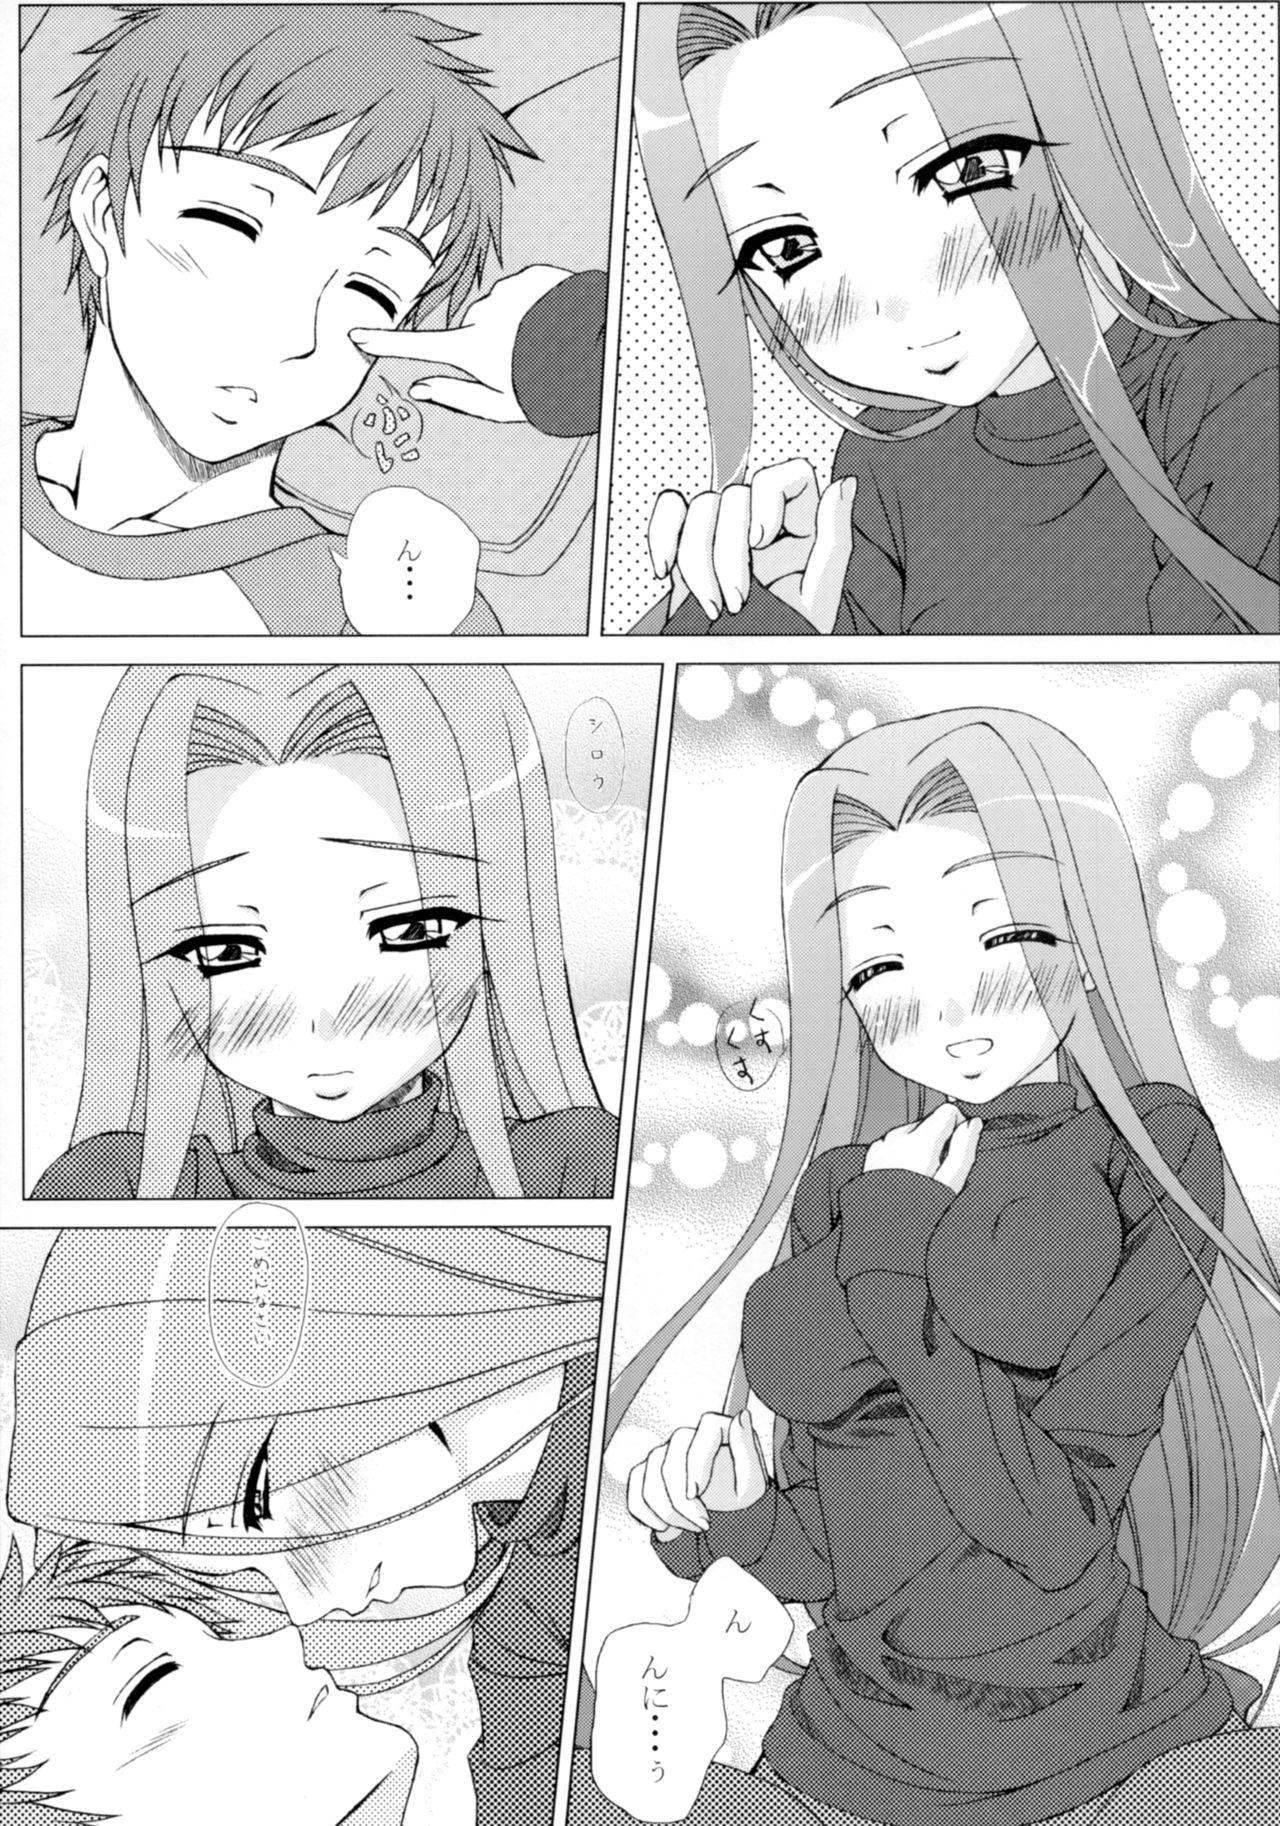 Hymen CUTE - Fate stay night Edging - Page 4